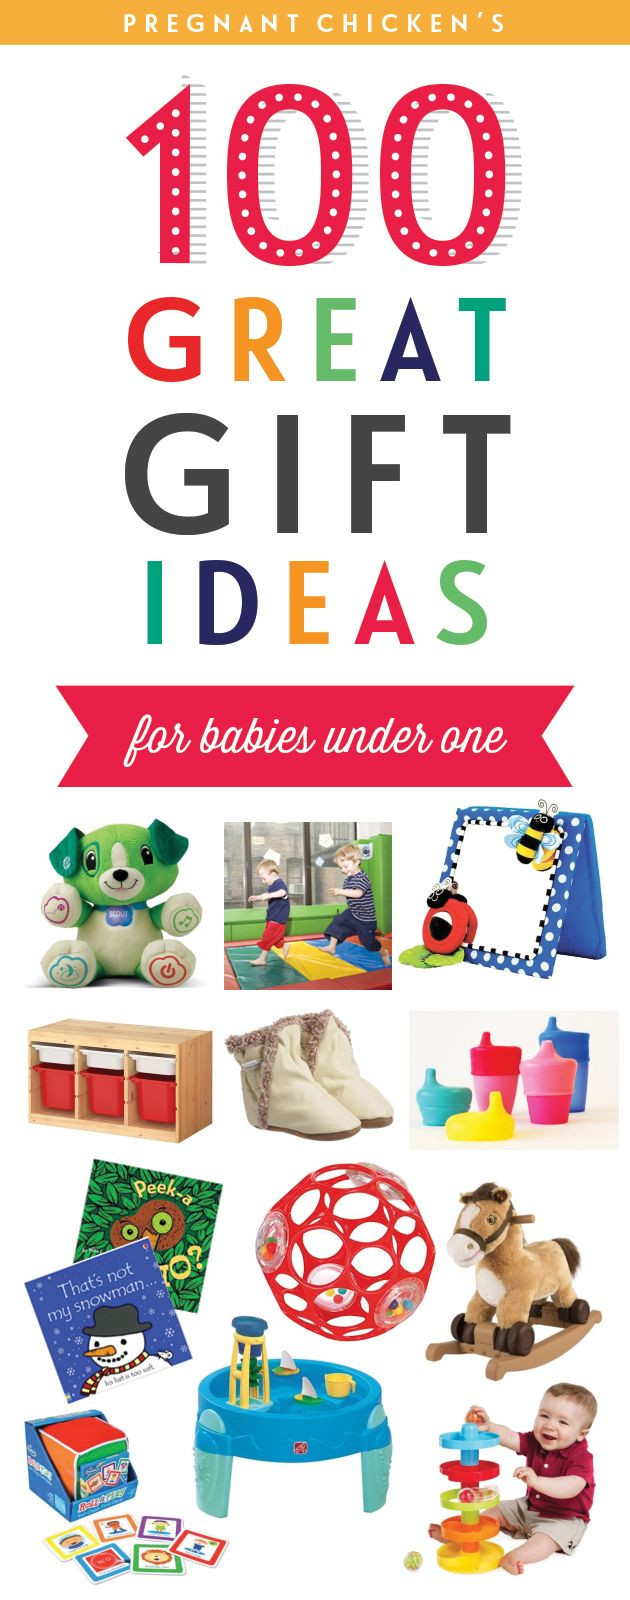 Baby Christmas Gift Ideas
 100 Great Gifts Ideas for Babies Under e